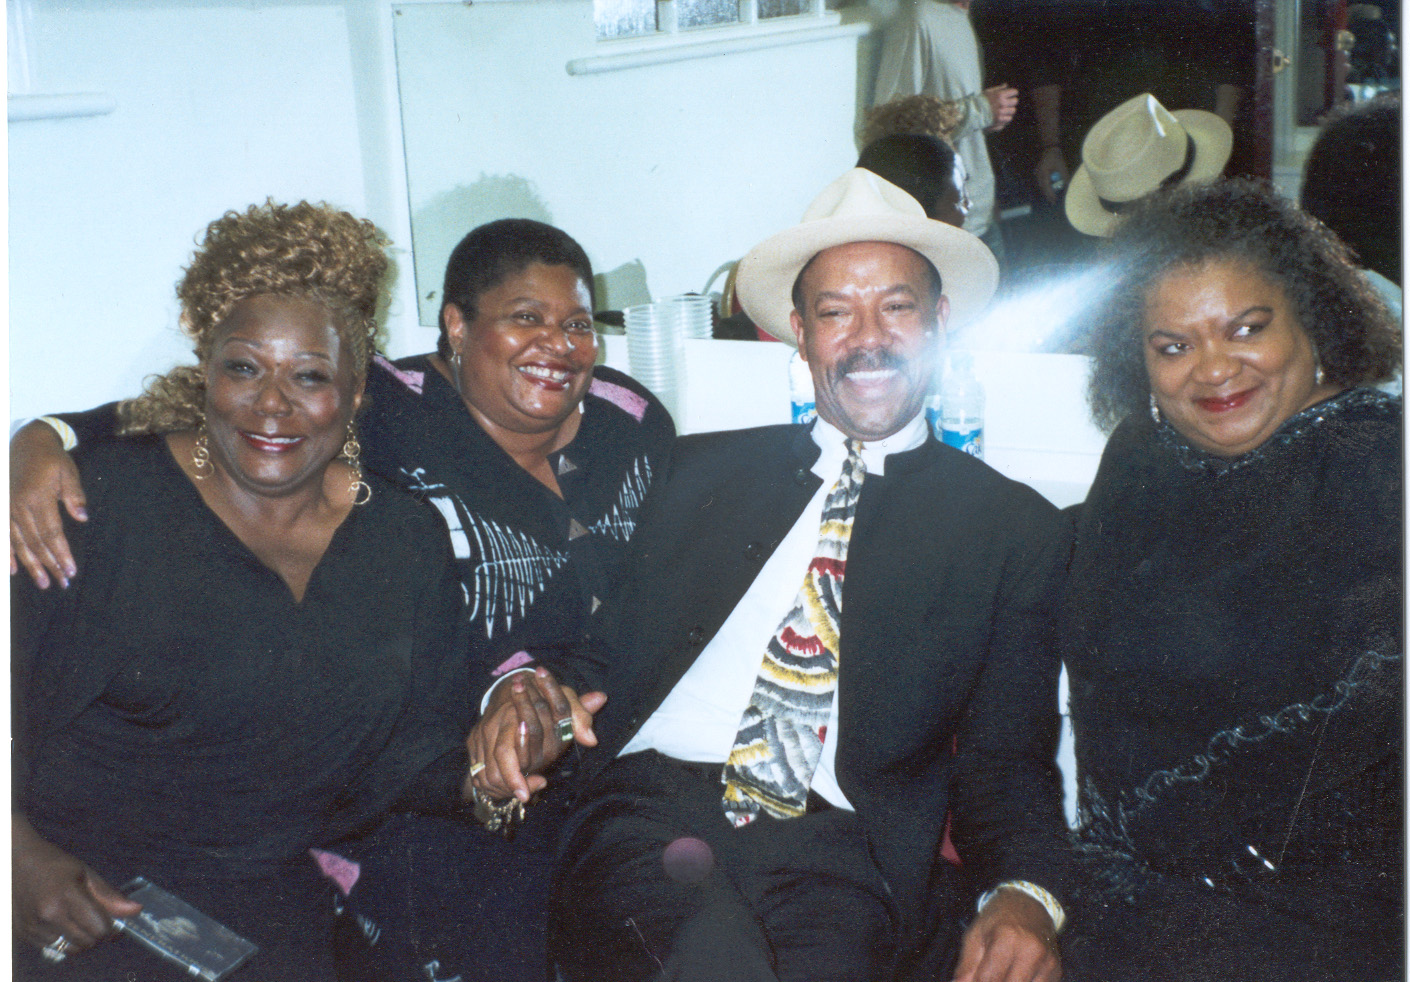 Michael with Zora Young, Deitra Farr and Grana Louise, Colne Blues Festival, UK (2007)